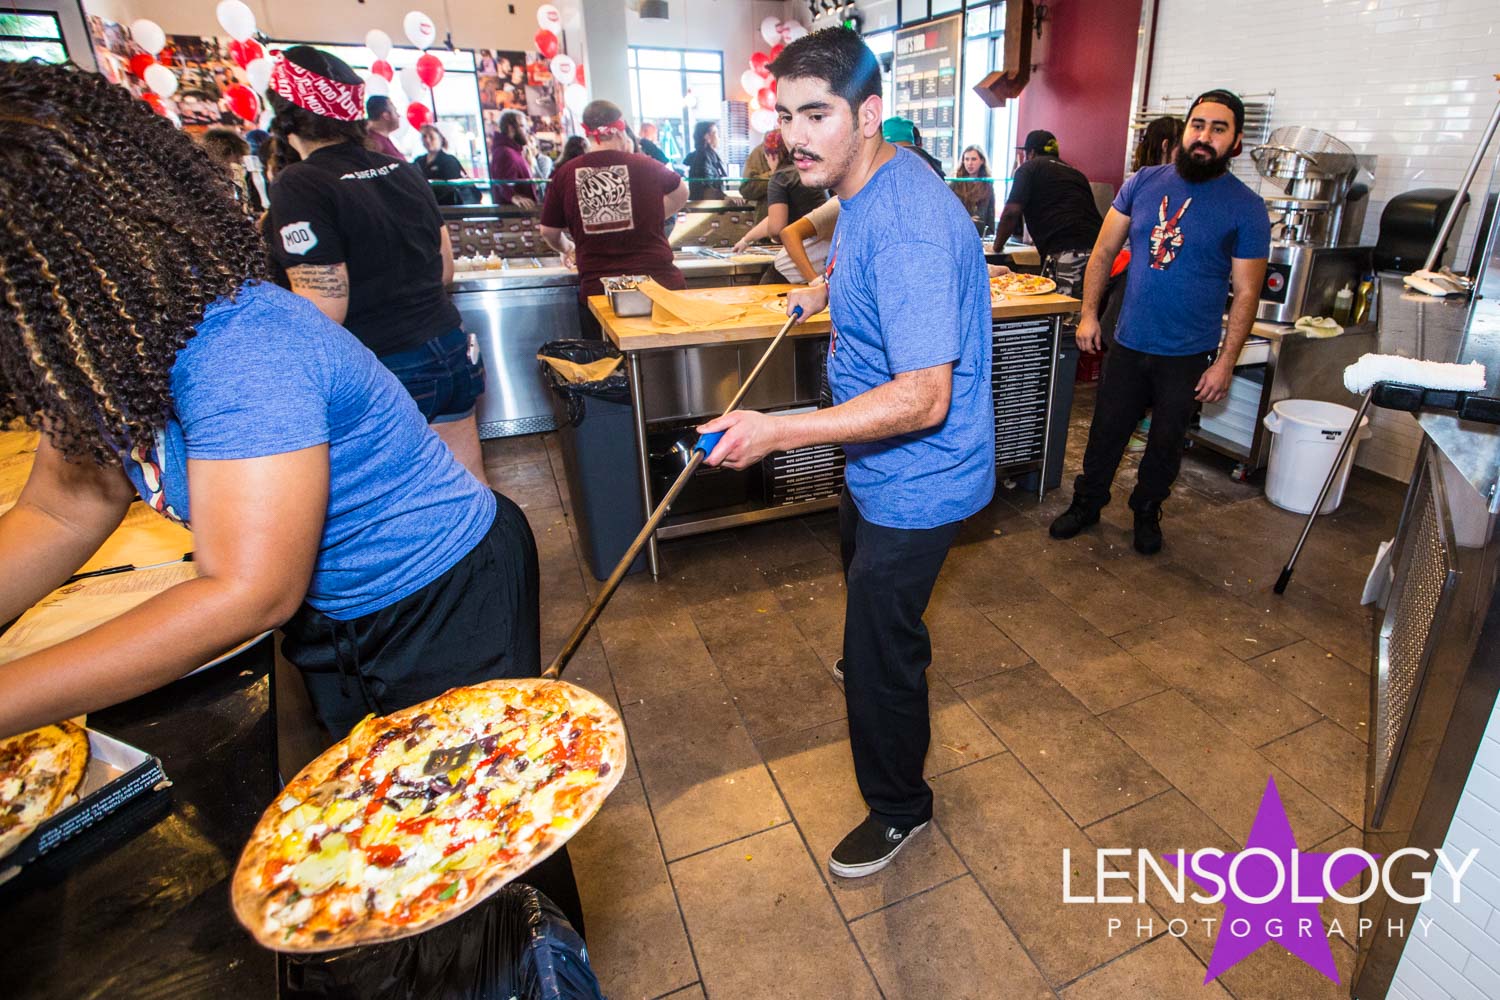 LENSOLOGY.NET - Modpizza restaurant opening, Riverside, CA.
All images are copyright of Lensology.net
Email: info@lensology.net
www.lensology.net